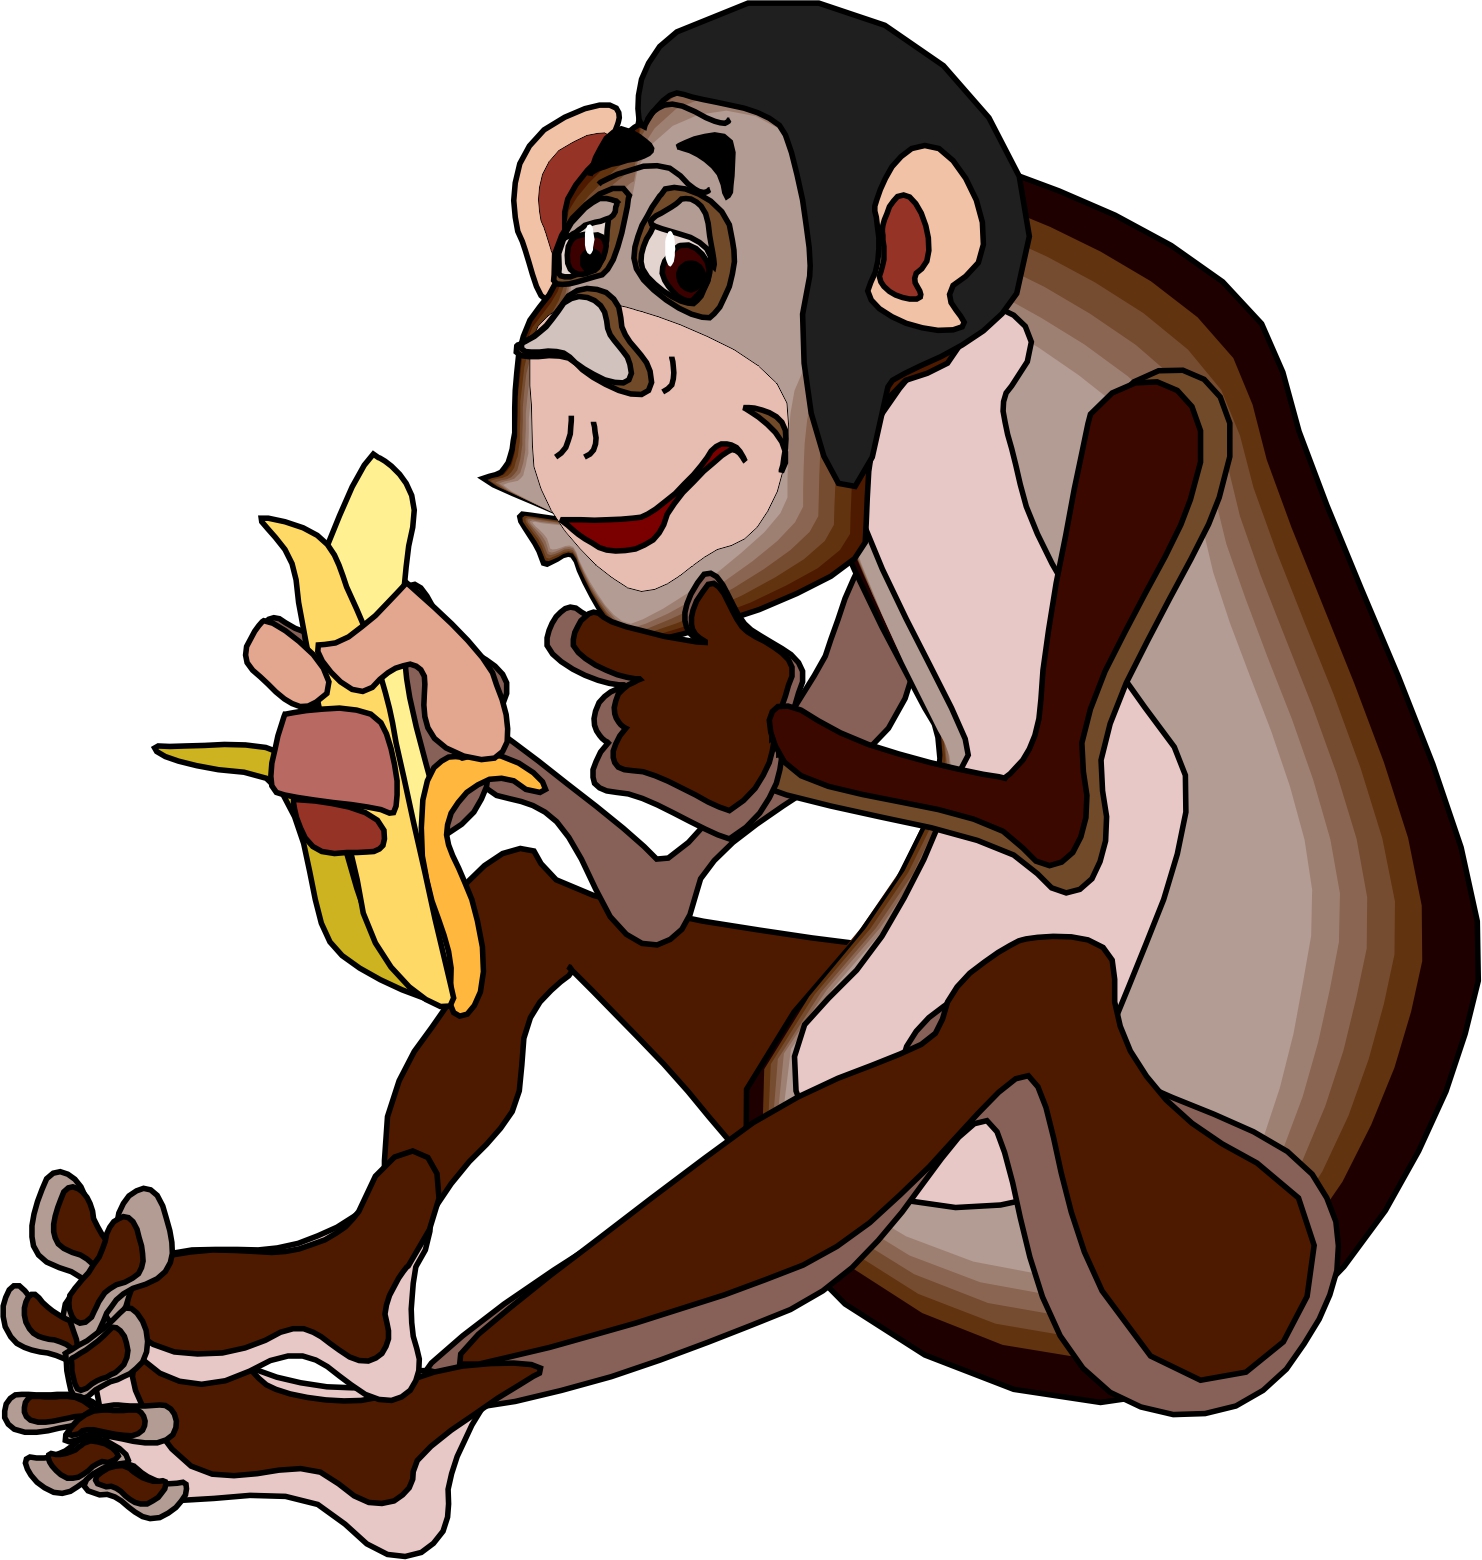 Cratoon Monkey | Coloring Pages Blog